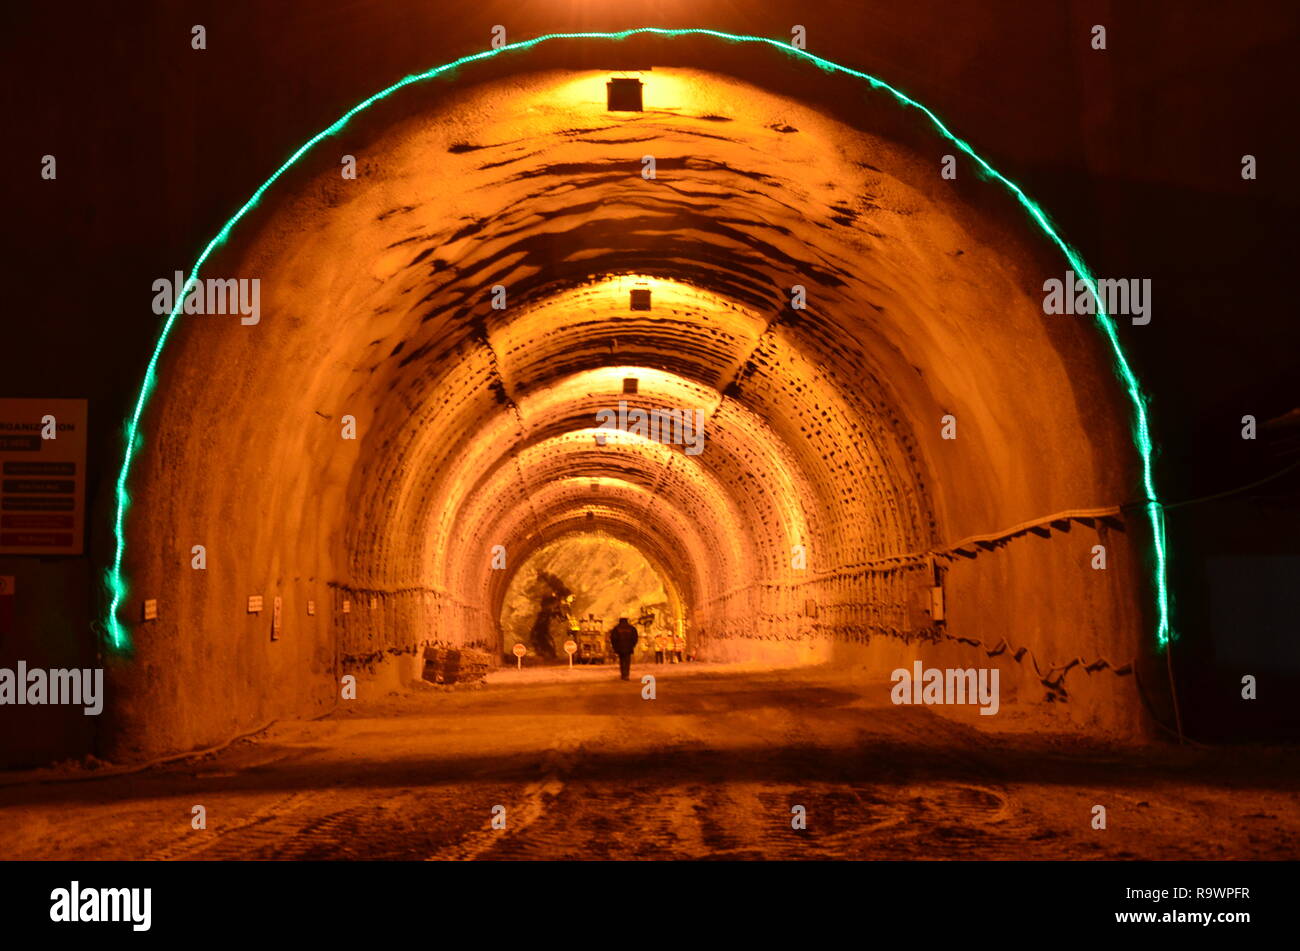 Mohmand agency FATA, tunnel built by FWO pakistan army in the tribal area of Pakistan Stock Photo